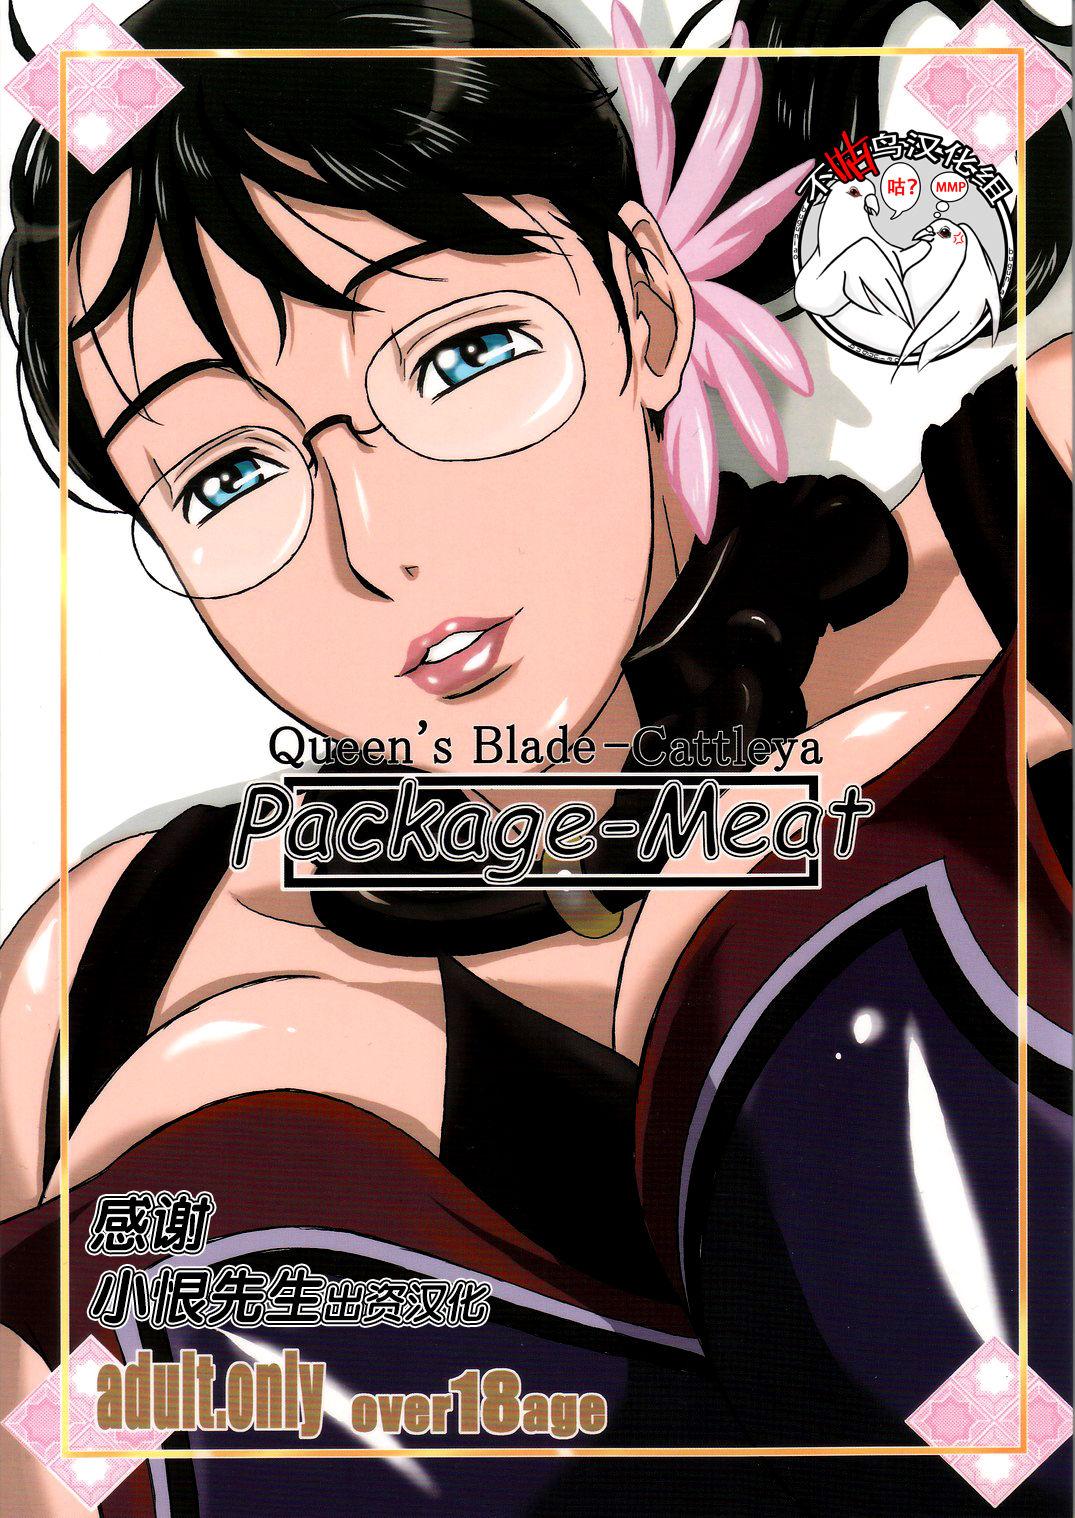 Pussysex (C72) [Shiawase Pullin Dou (Ninroku)] Package Meat (Queen's Blade) [Chinese] amateur coloring version - Queens blade Tats - Page 1